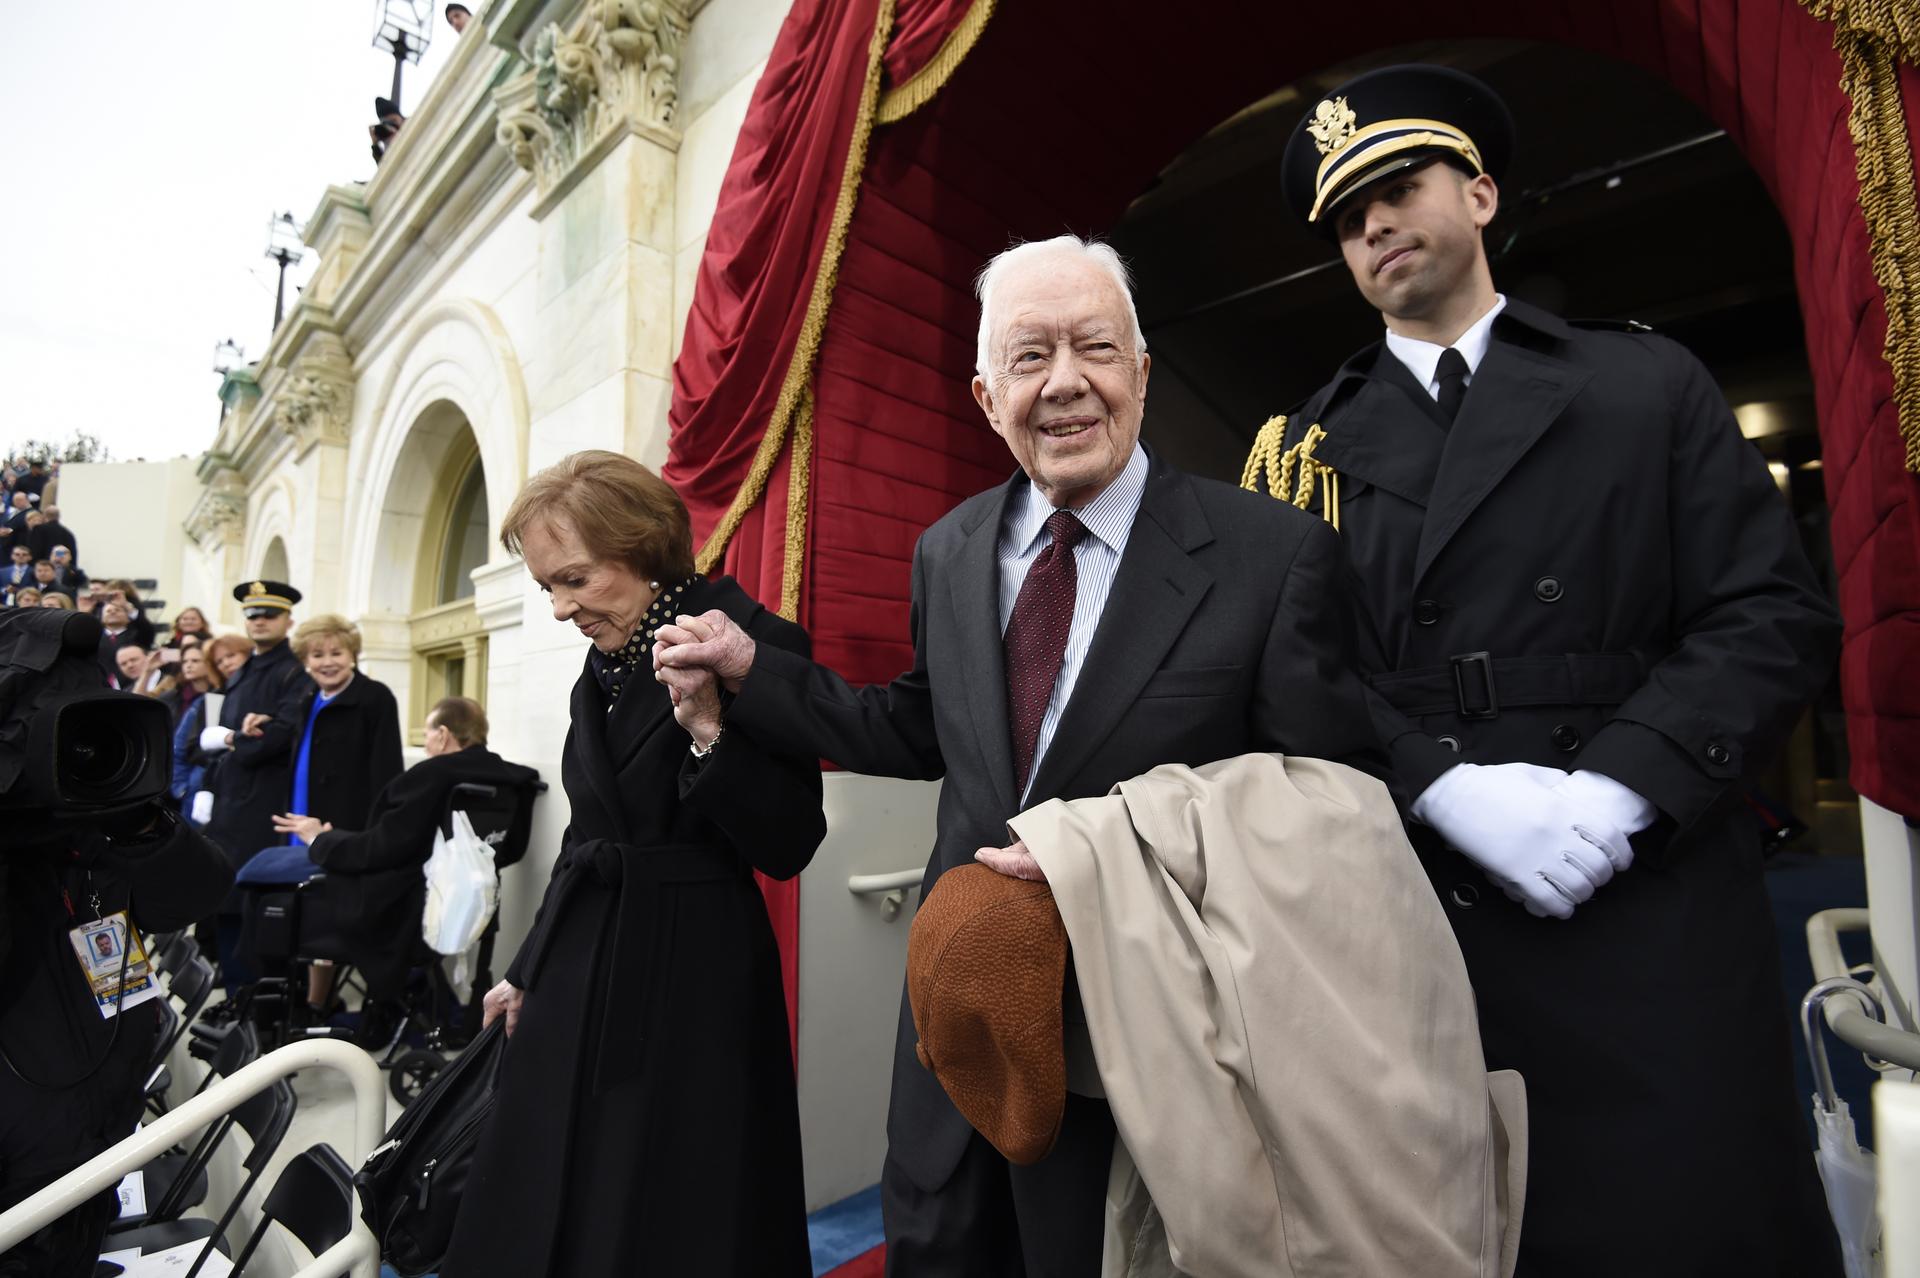 Former US President Jimmy Carter and First Lady Rosalynn Carter arrive for the Presidential Inauguration of Trump 